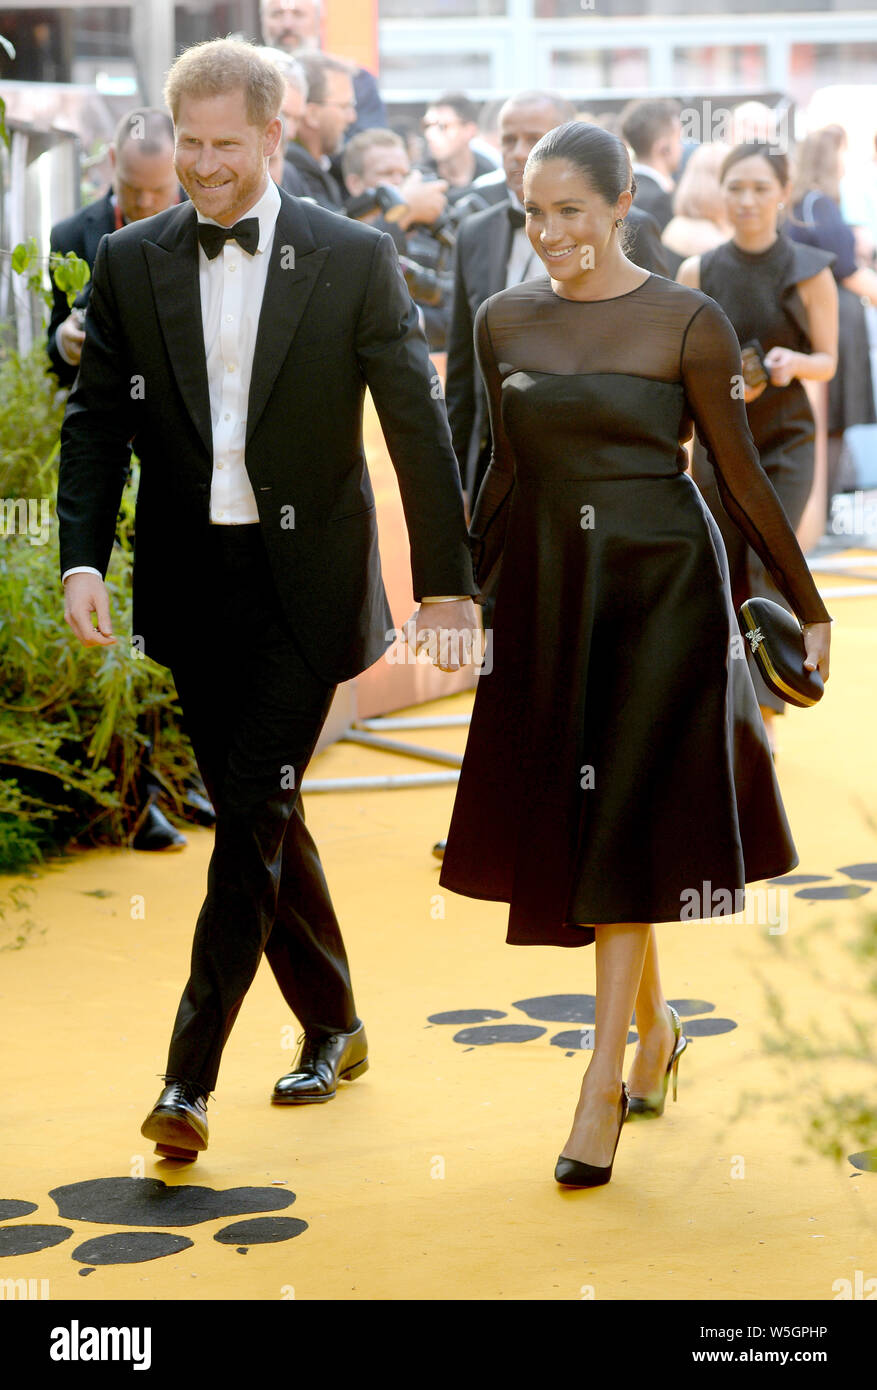 Photo Must Be Credited ©Alpha Press 078237 14/07/2019 Prince Harry Duke Of Sussex and Meghan Markle Duchess Of Sussex The Lion King European Premiere London Stock Photo